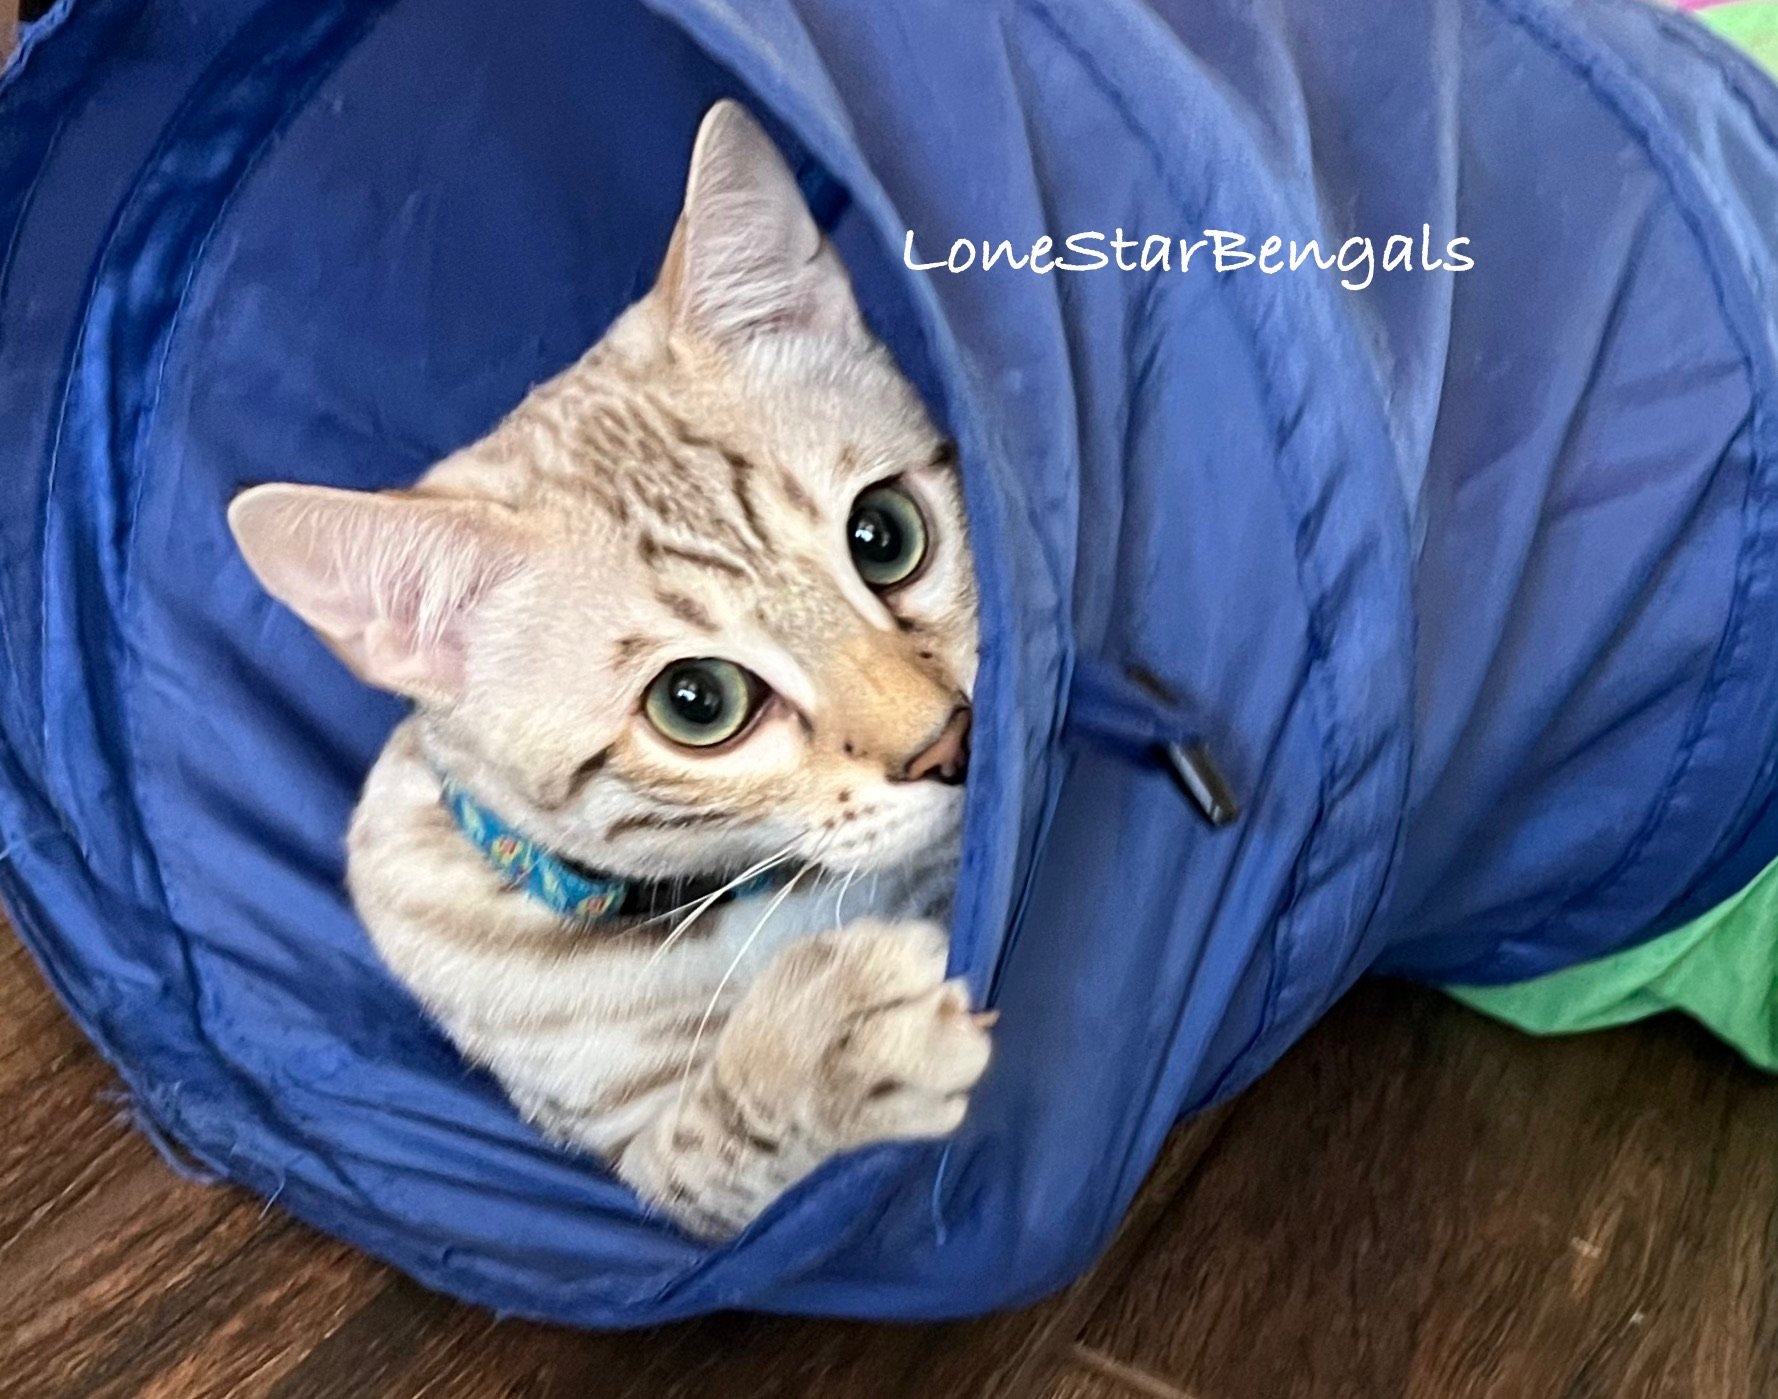 An International Winner cat peeks out of a blue tunnel, showcasing Superior Quality Bengals and Feline Passion.